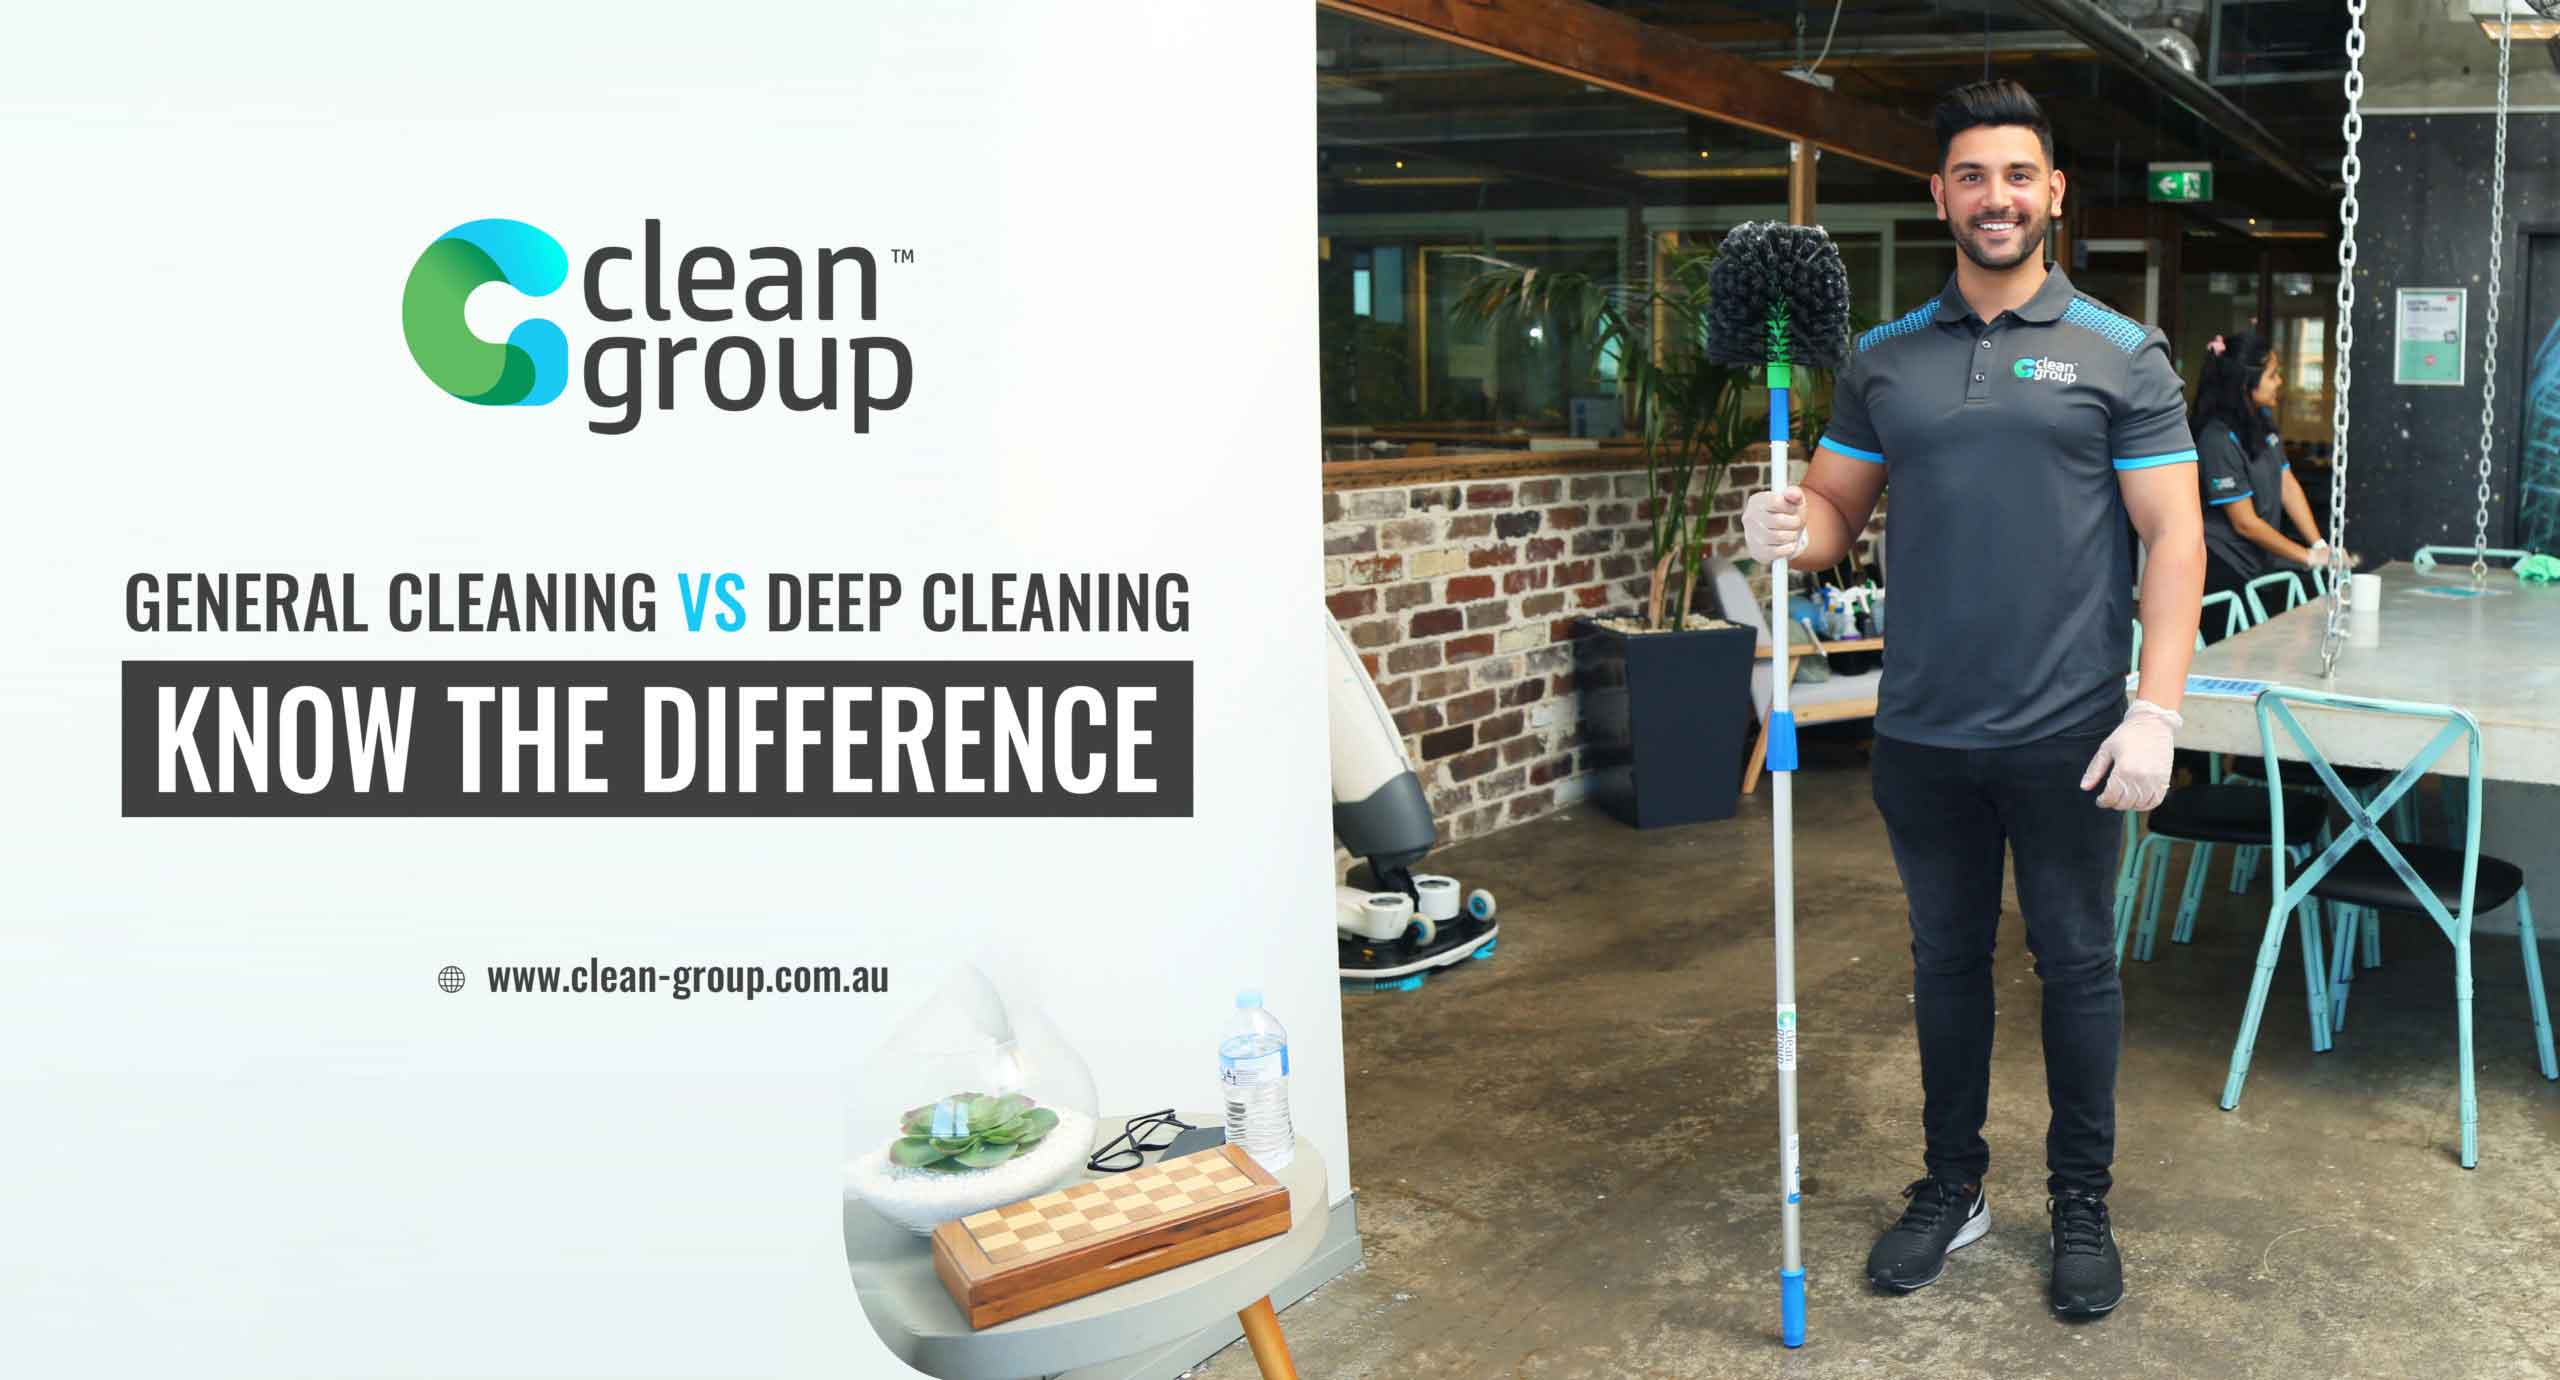 https://www.clean-group.com.au/wp-content/uploads/2020/12/General-Cleaning-Deep-Cleaning-Know-Difference-scaled-1.jpg